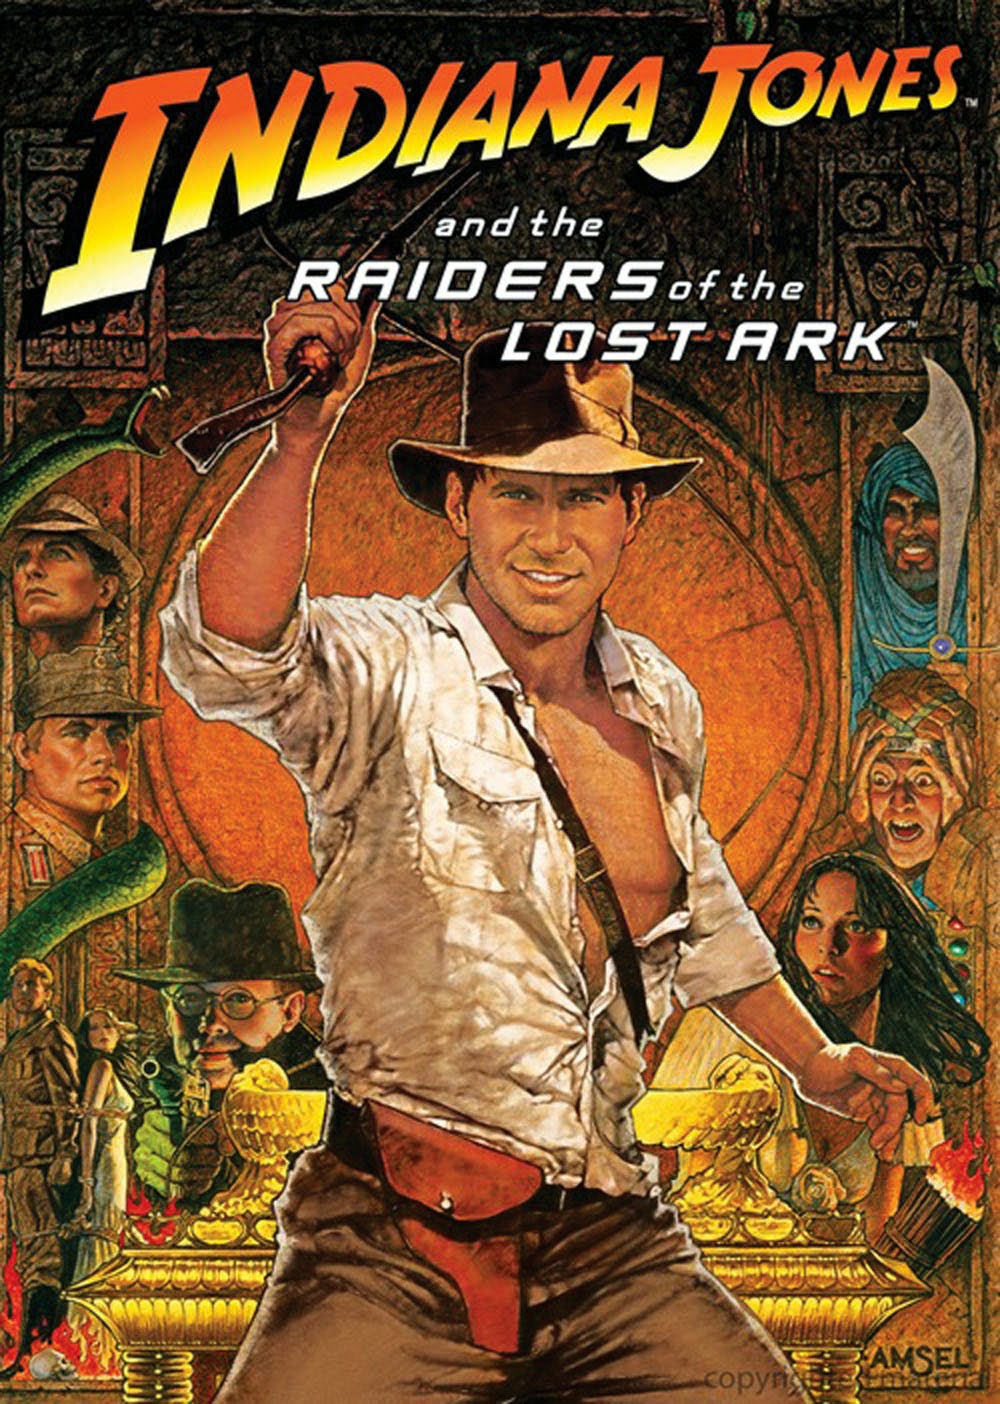 Raiders of the Lost Ark & Indiana Jones and the Temple of Doom